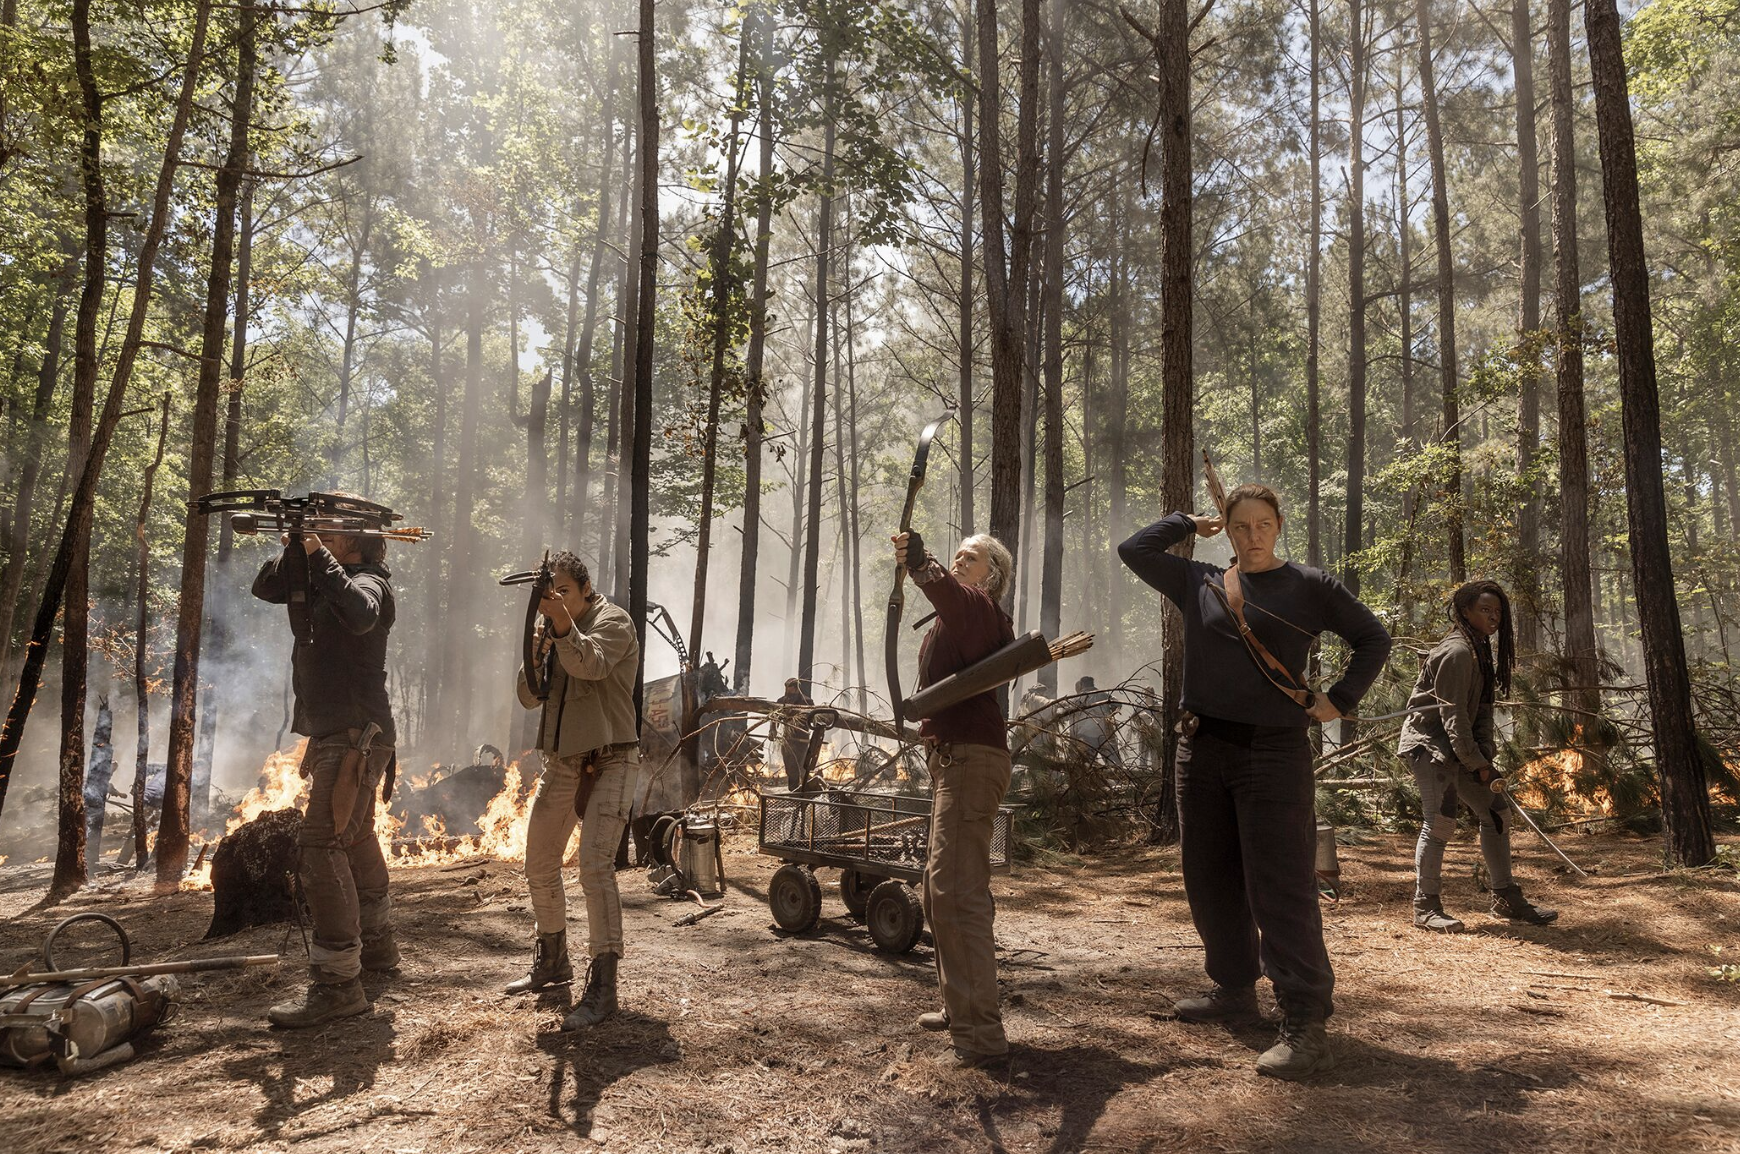 The Walking Dead S10 Confirms Casting As First Look Pics Arrive Images, Photos, Reviews